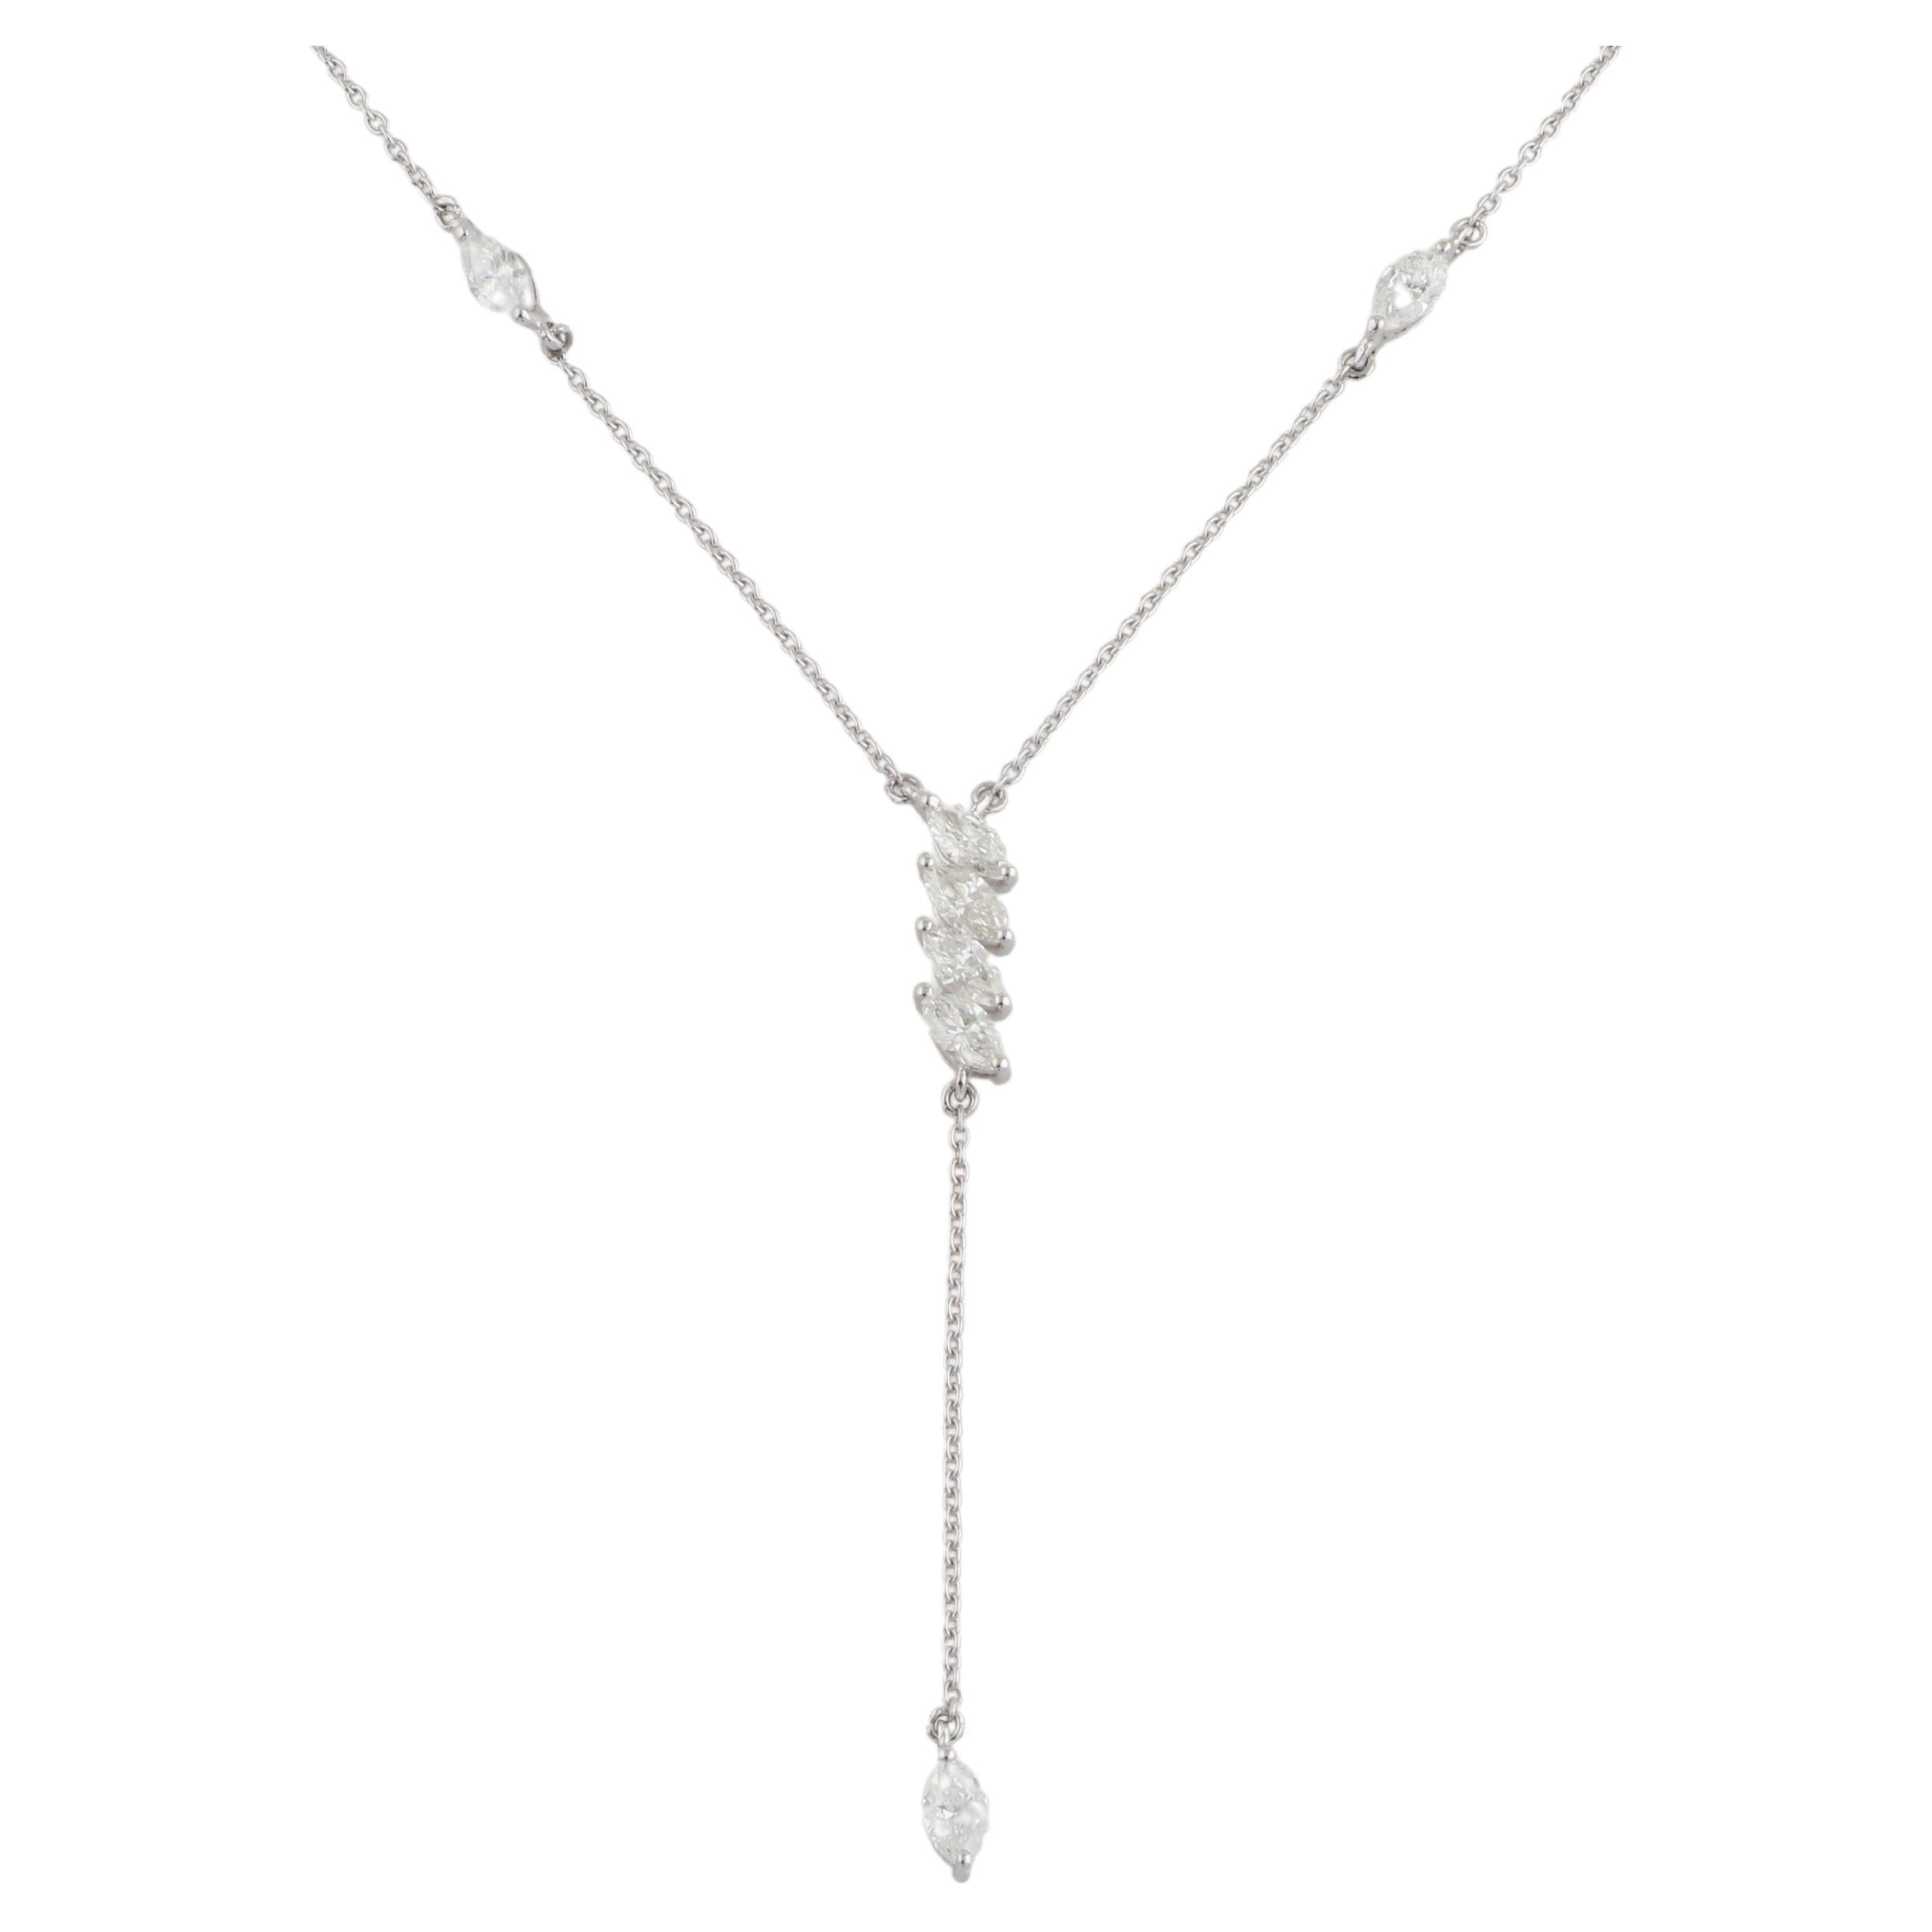 This diamond lariat necklace is a true statement piece, exuding opulence and sophistication. Whether worn for a special occasion or as a cherished everyday accessory, it effortlessly elevates any ensemble with its exquisite design and brilliant